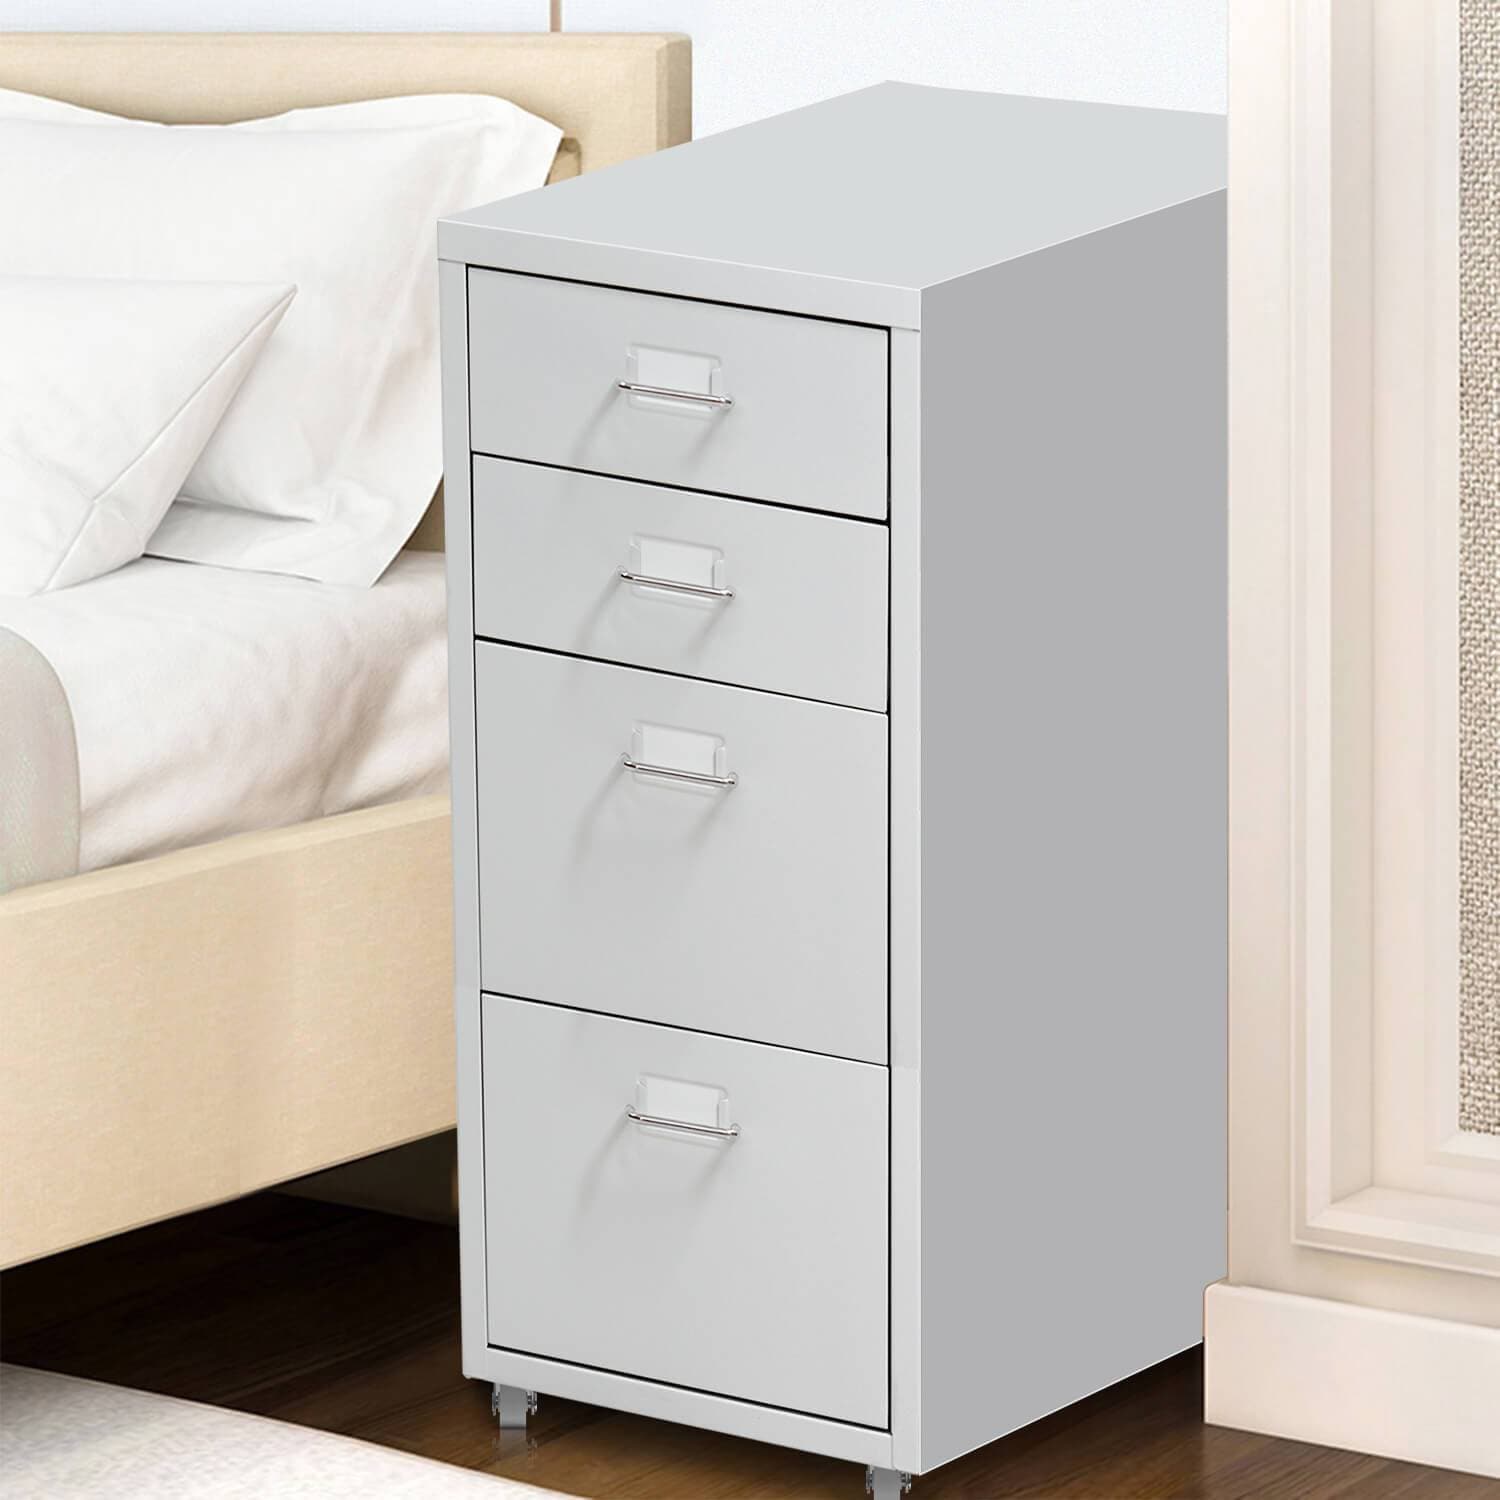 office & study 4 Tiers Steel Orgainer Metal File Cabinet With Drawers Office Furniture White